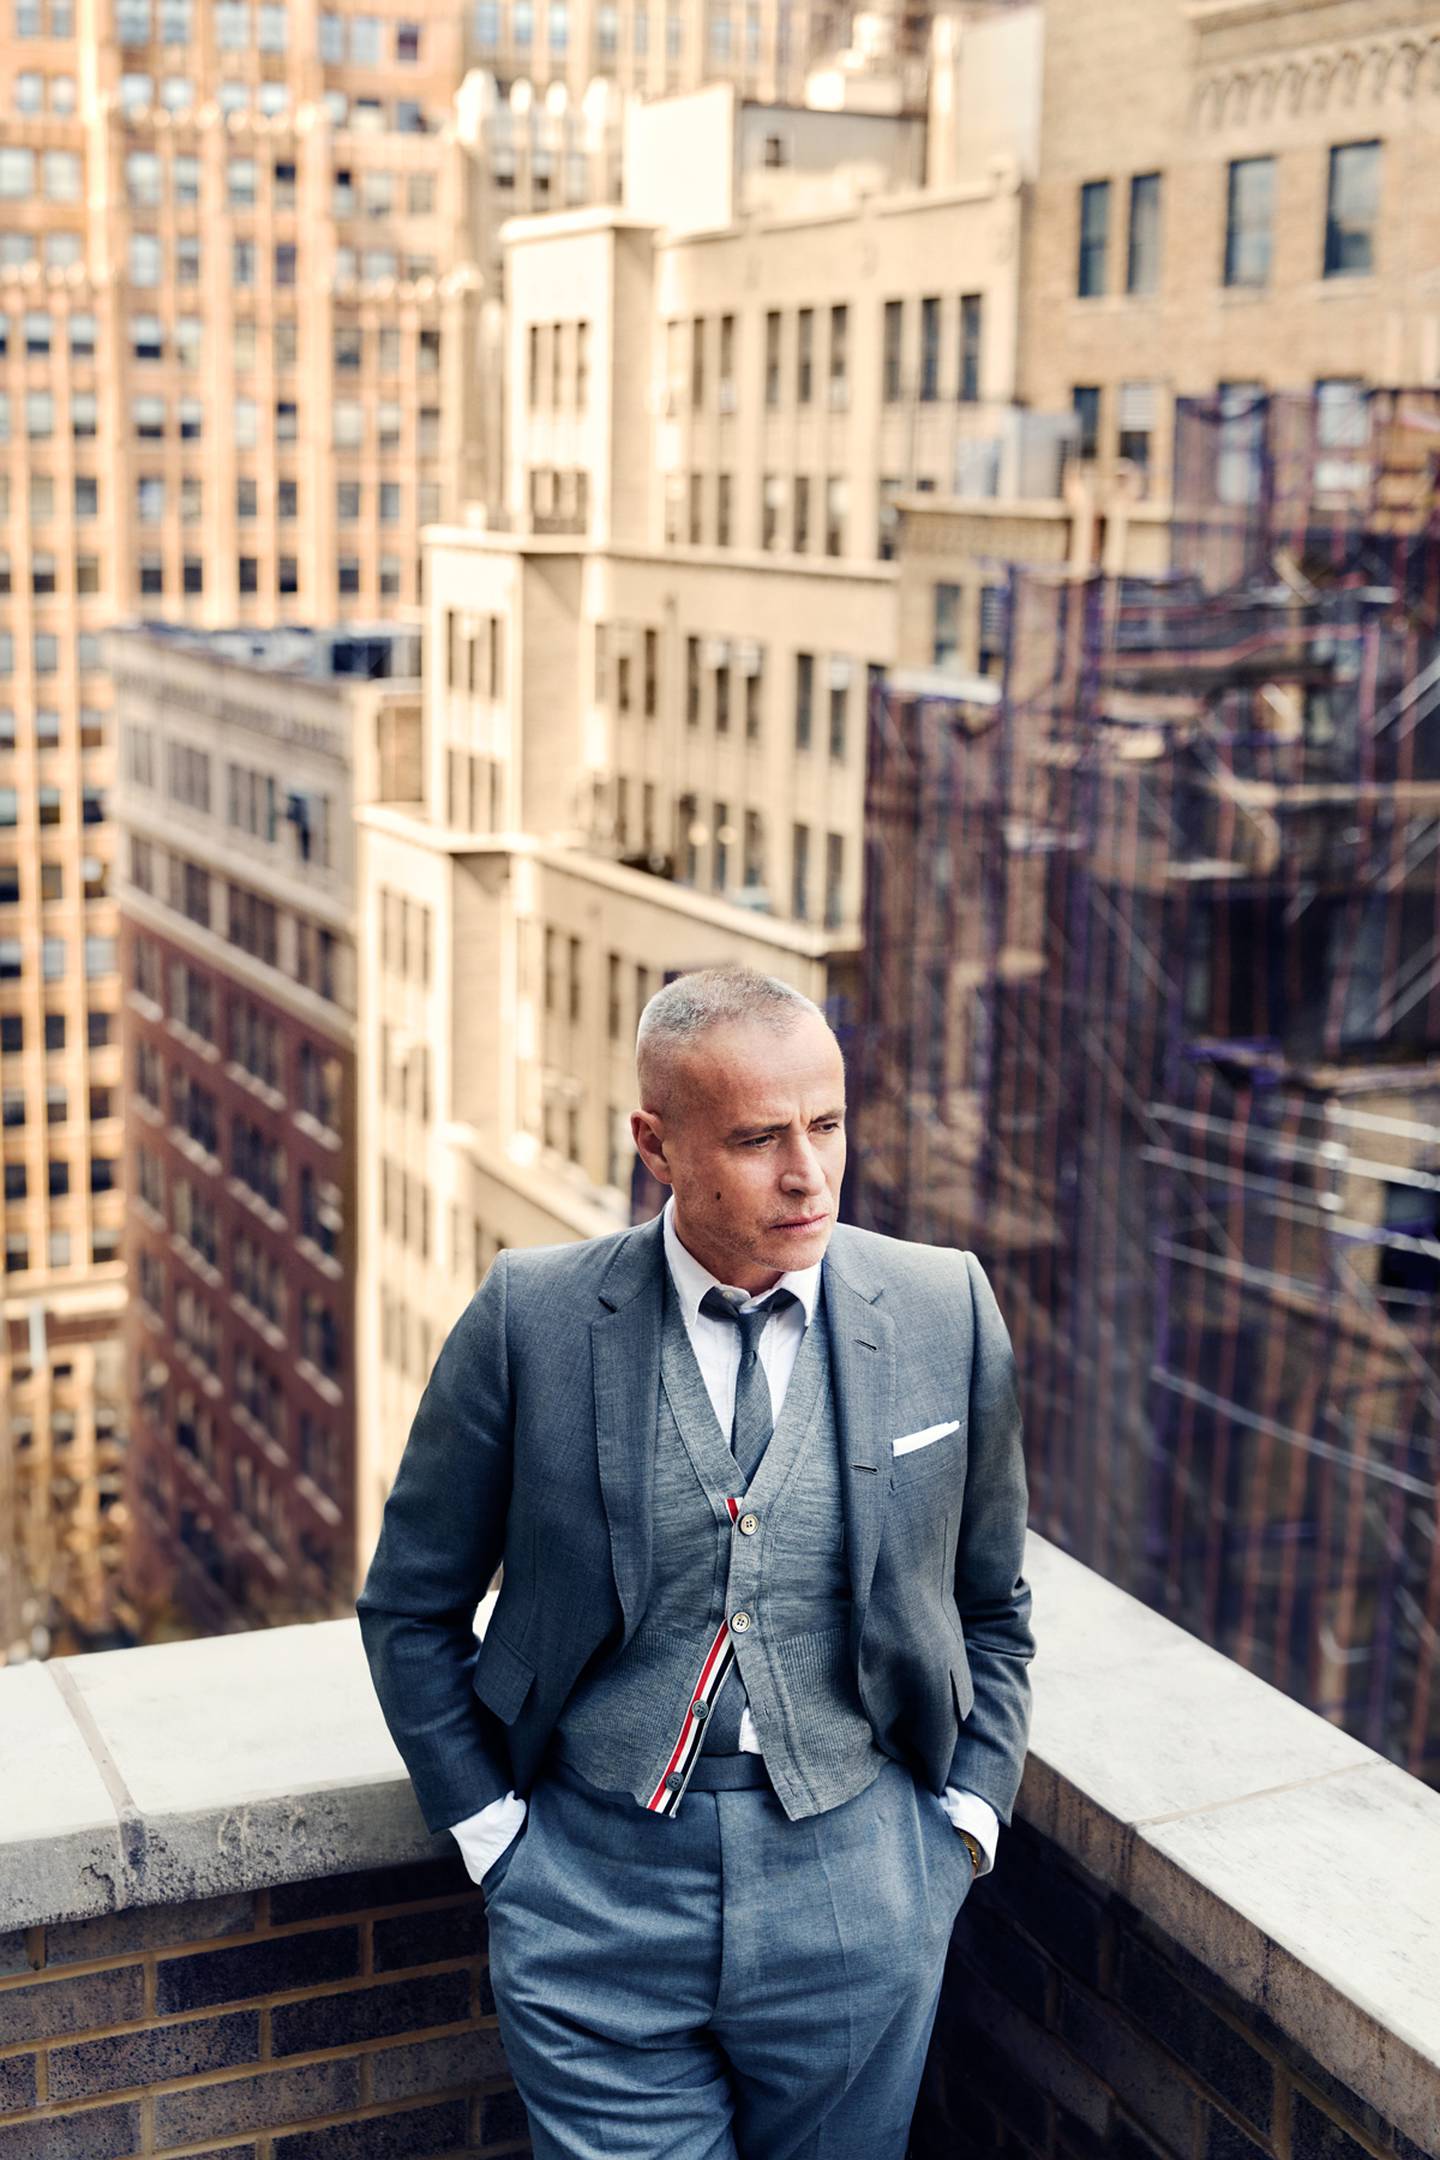 In 2018, Thom Browne sold 85 percent of his company to Zegna in a deal that valued the label at $500 million. Now, the designer is marking 20 years in business and planning his next chapter.